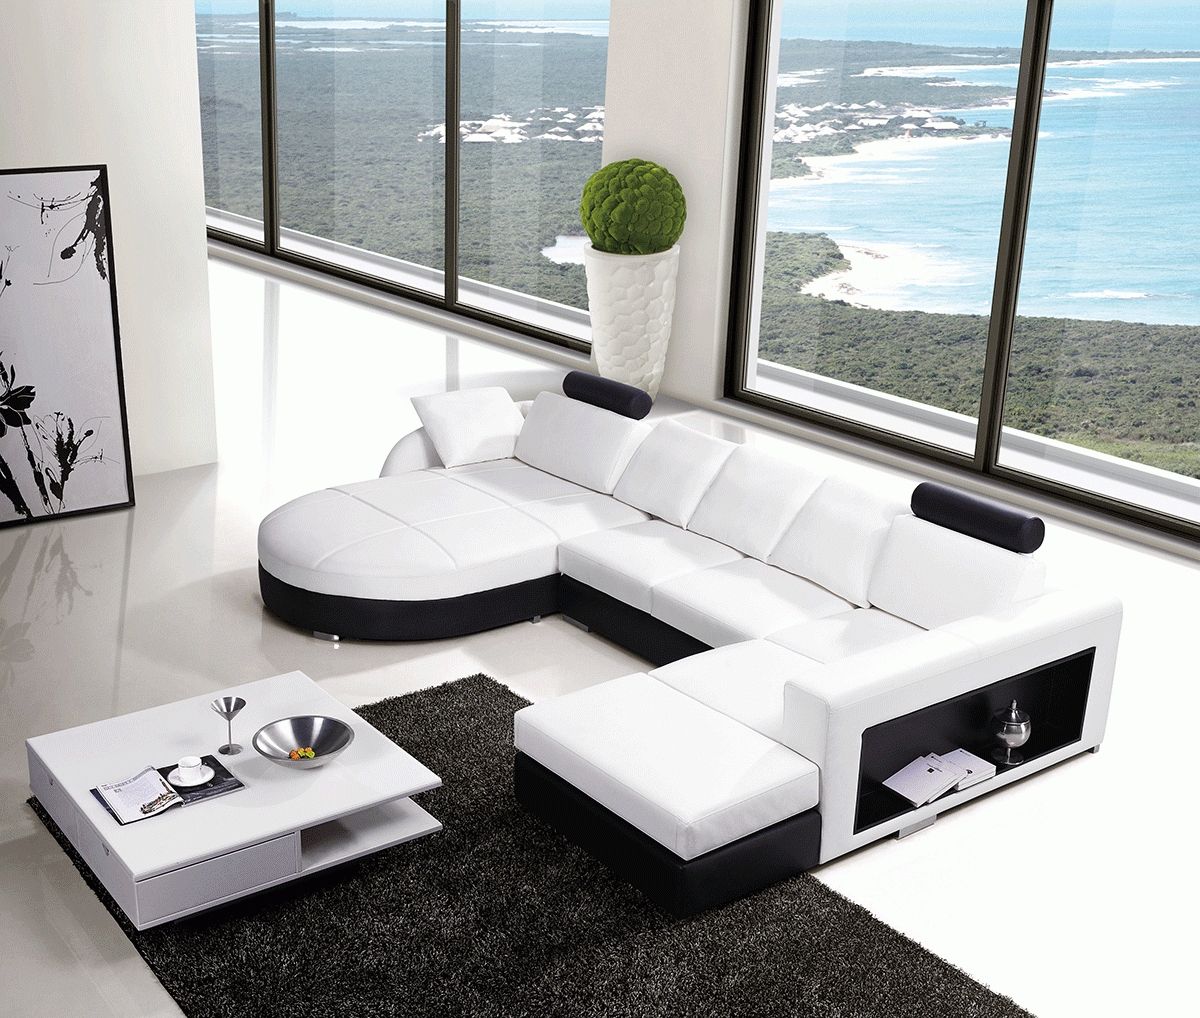 Modern Leather Sectional Sofa W/ Built In Side Bookshelf Intended For Sectional Sofa With Storage (View 24 of 25)